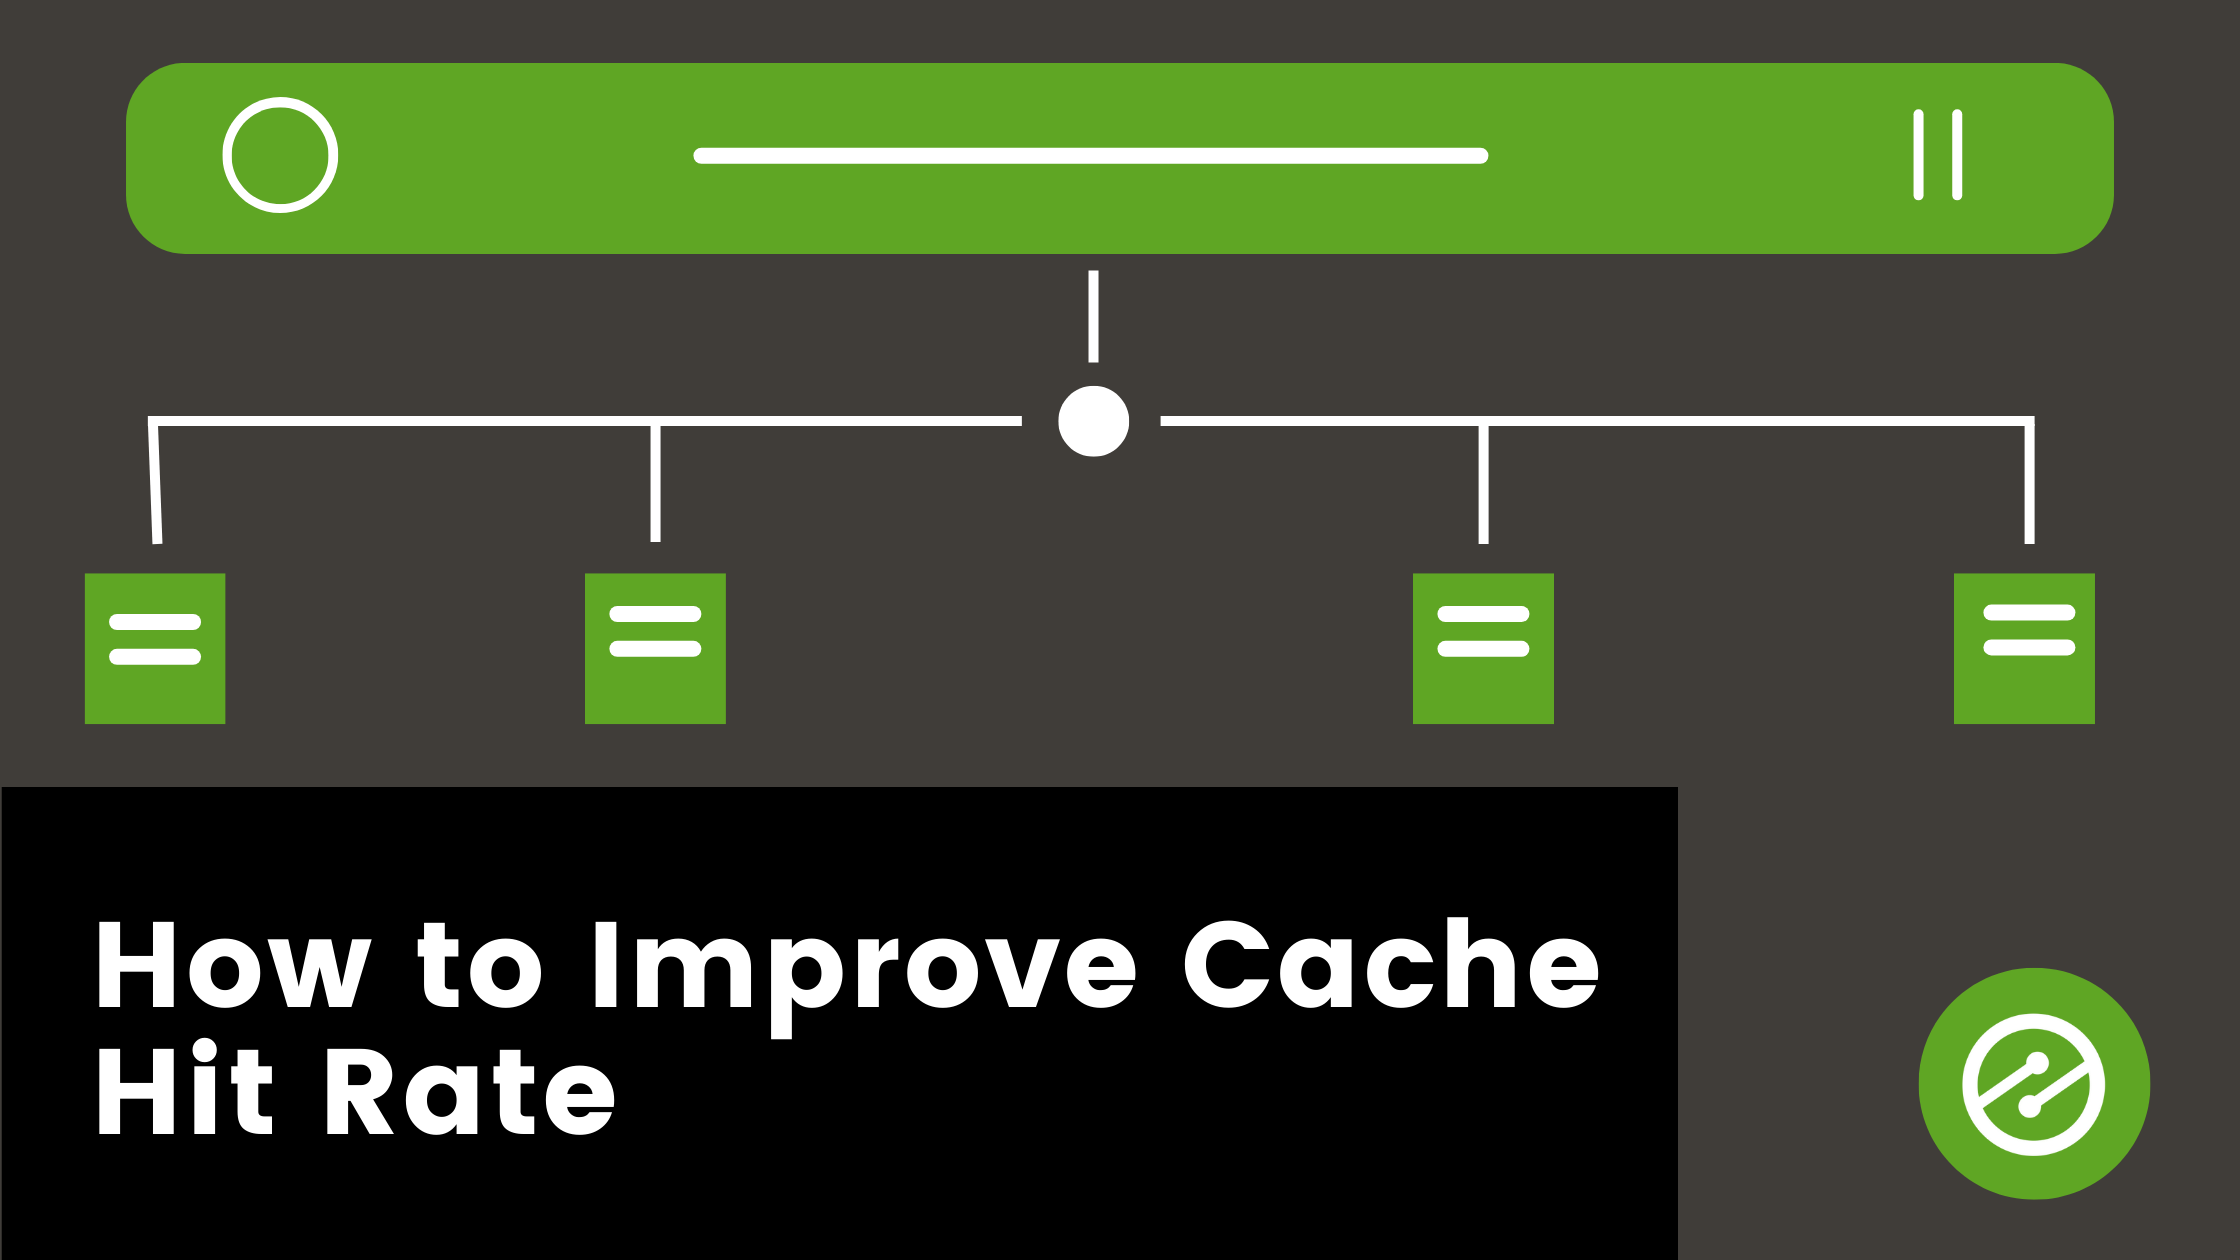 How to Improve Cache Hit Rate